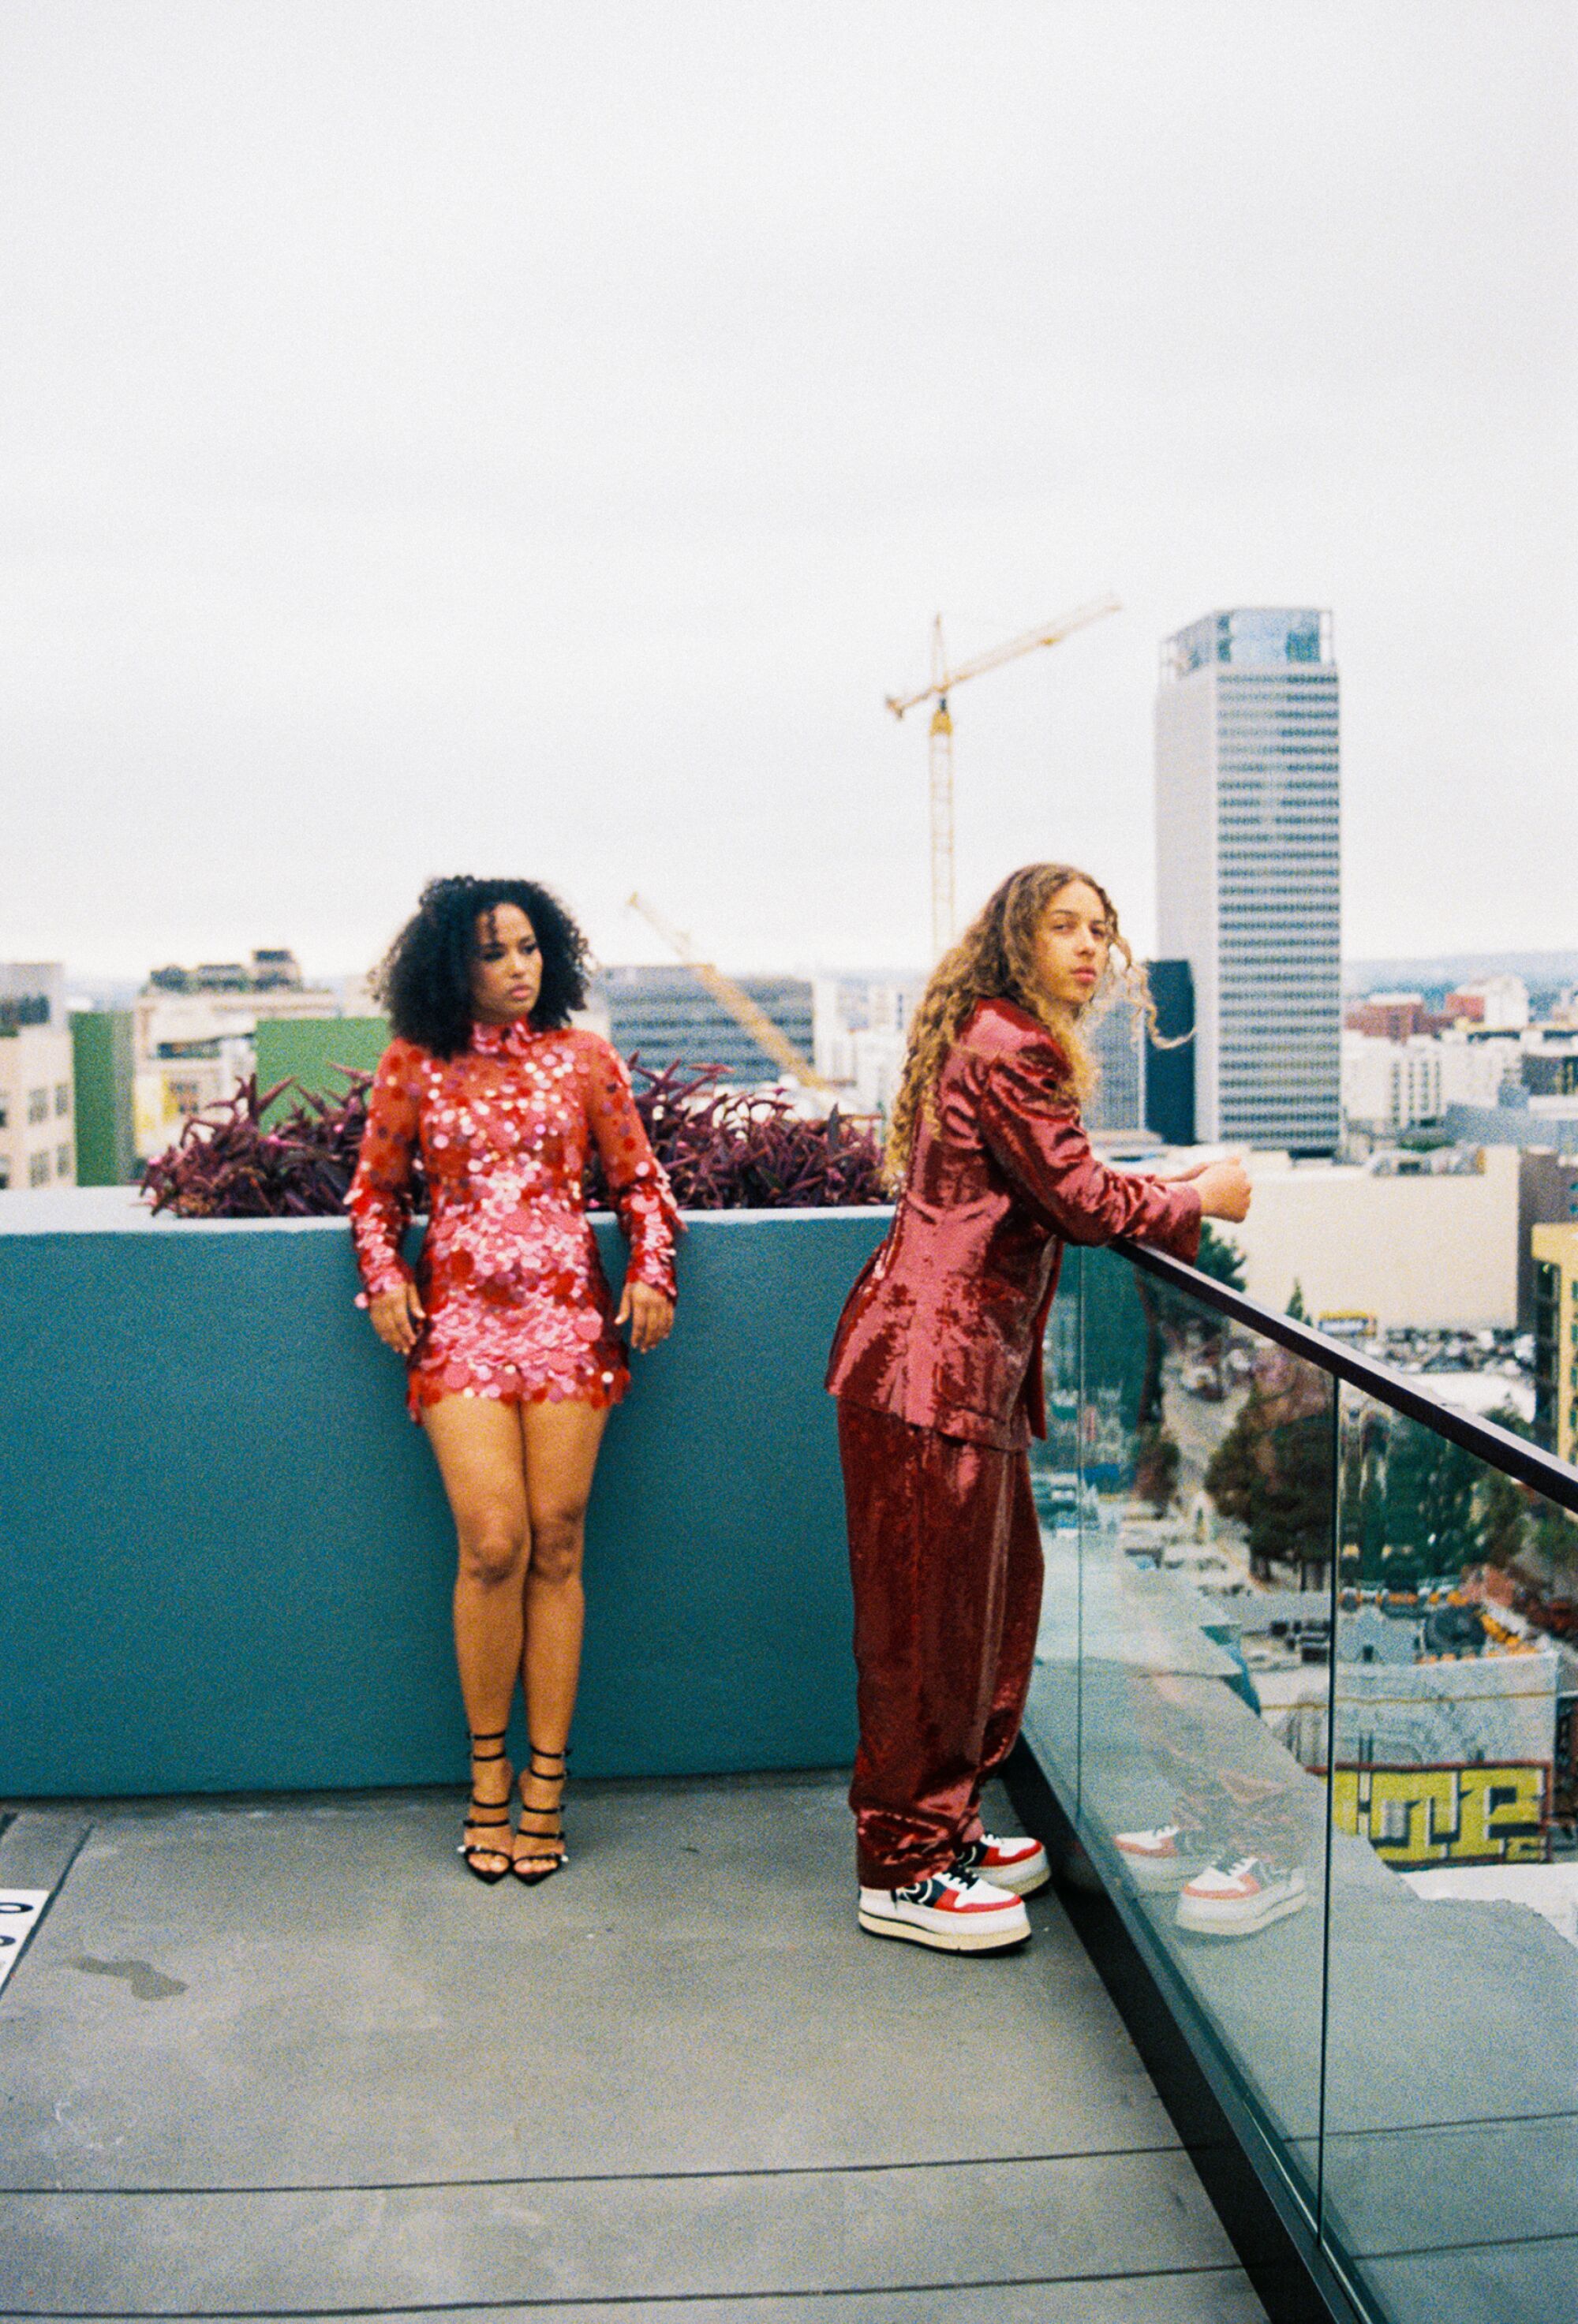 Two people wearing sequined red outfits lean against a waist-high wall on a rooftop.